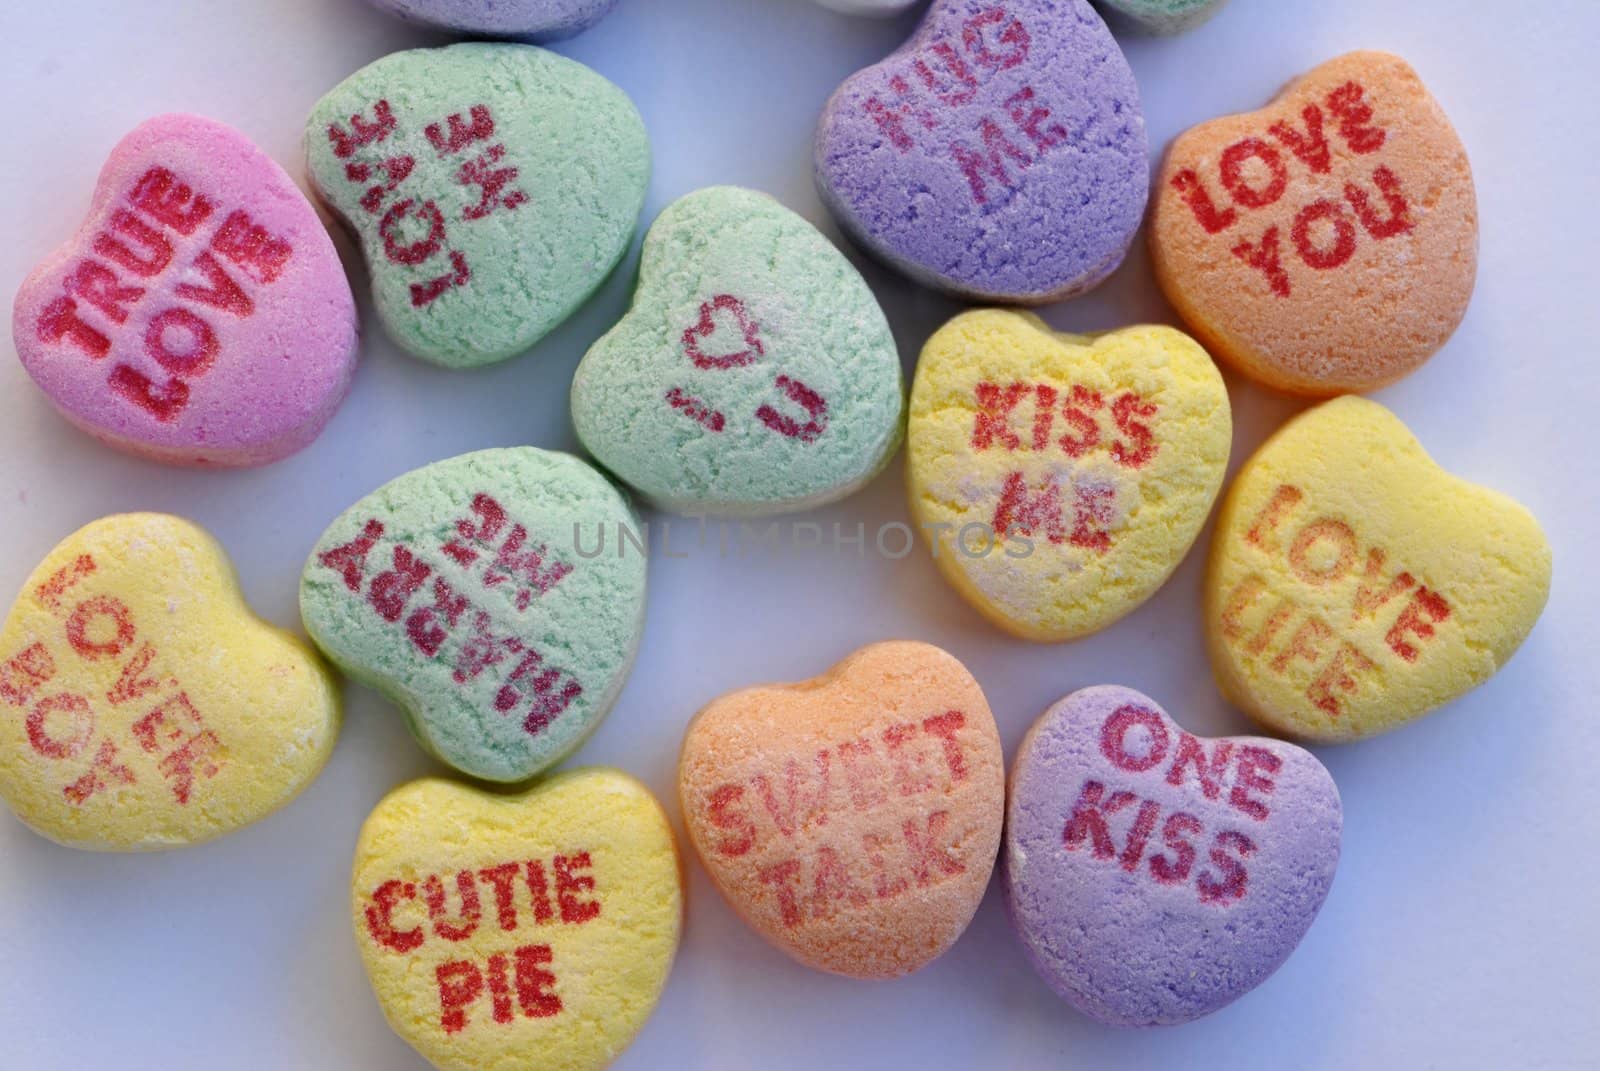 An isolated shot of Love Heart Candy in different colors